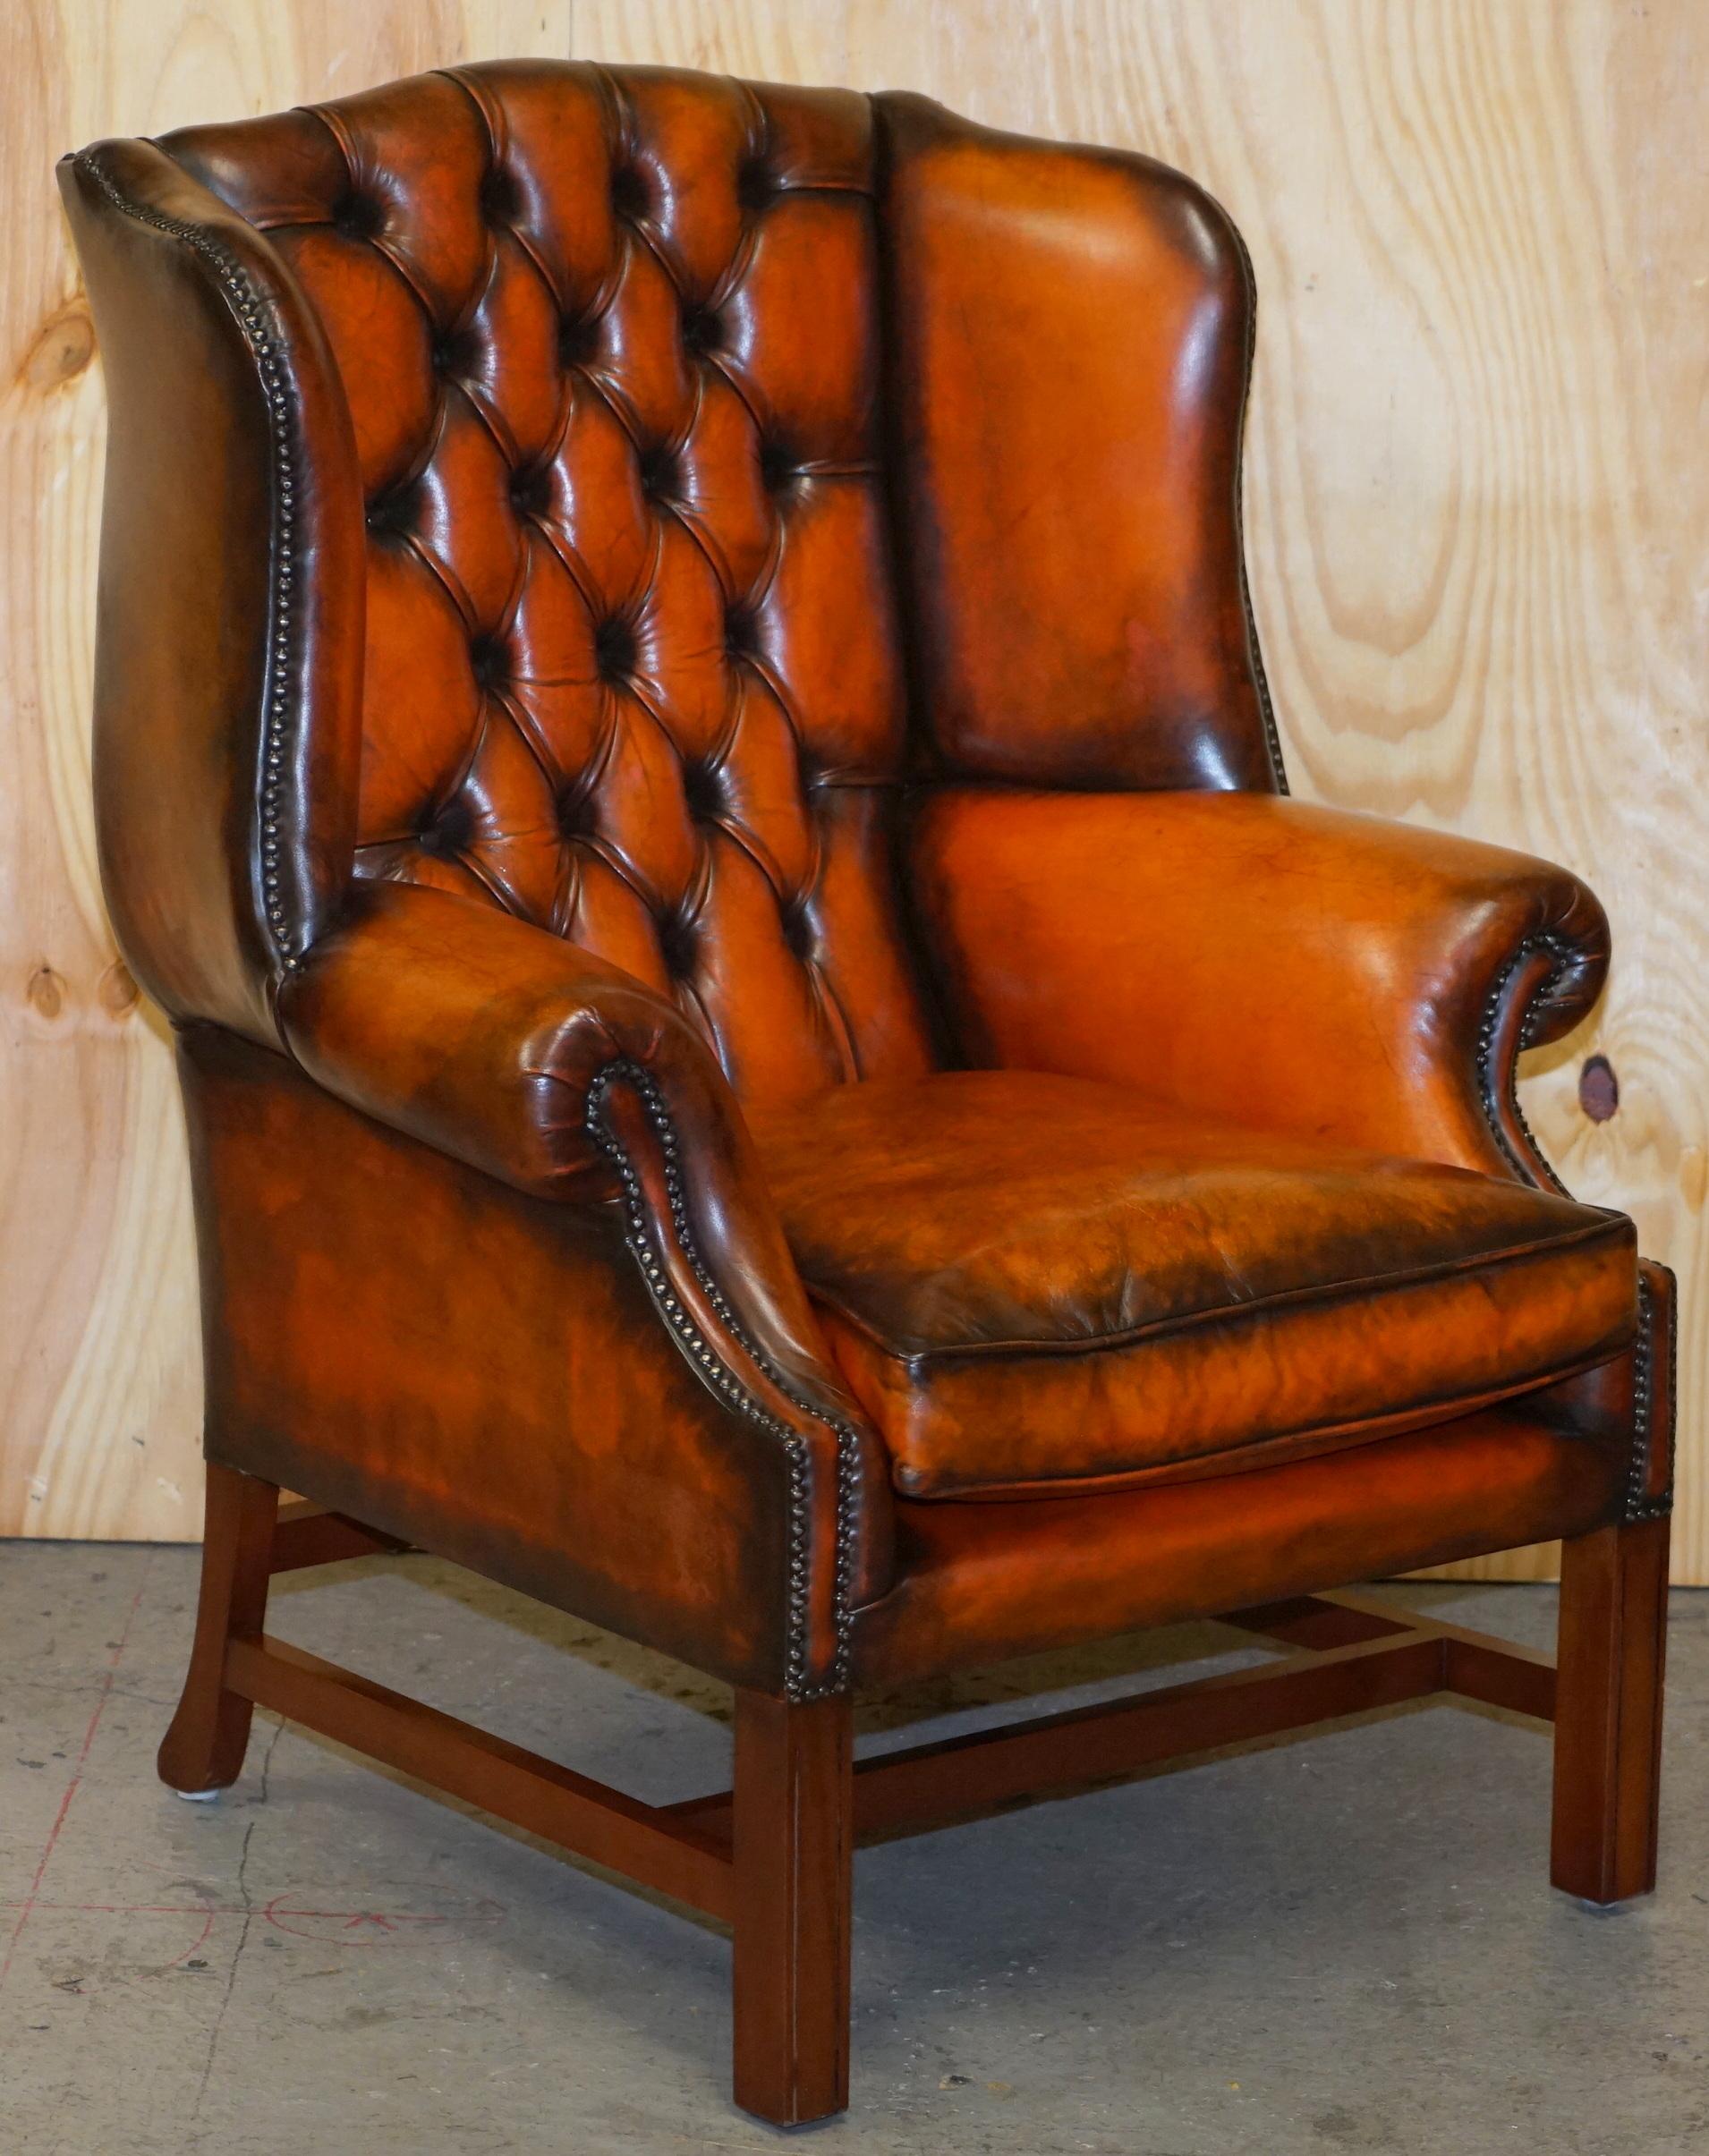 We are delighted to offer for sale this stunning pair of lovely Chesterfield Georgian H framed fully restored vintage wingback armchairs in whisky brown leather with thick heavy feather filled cushions

A good looking and comfortable pair of coil